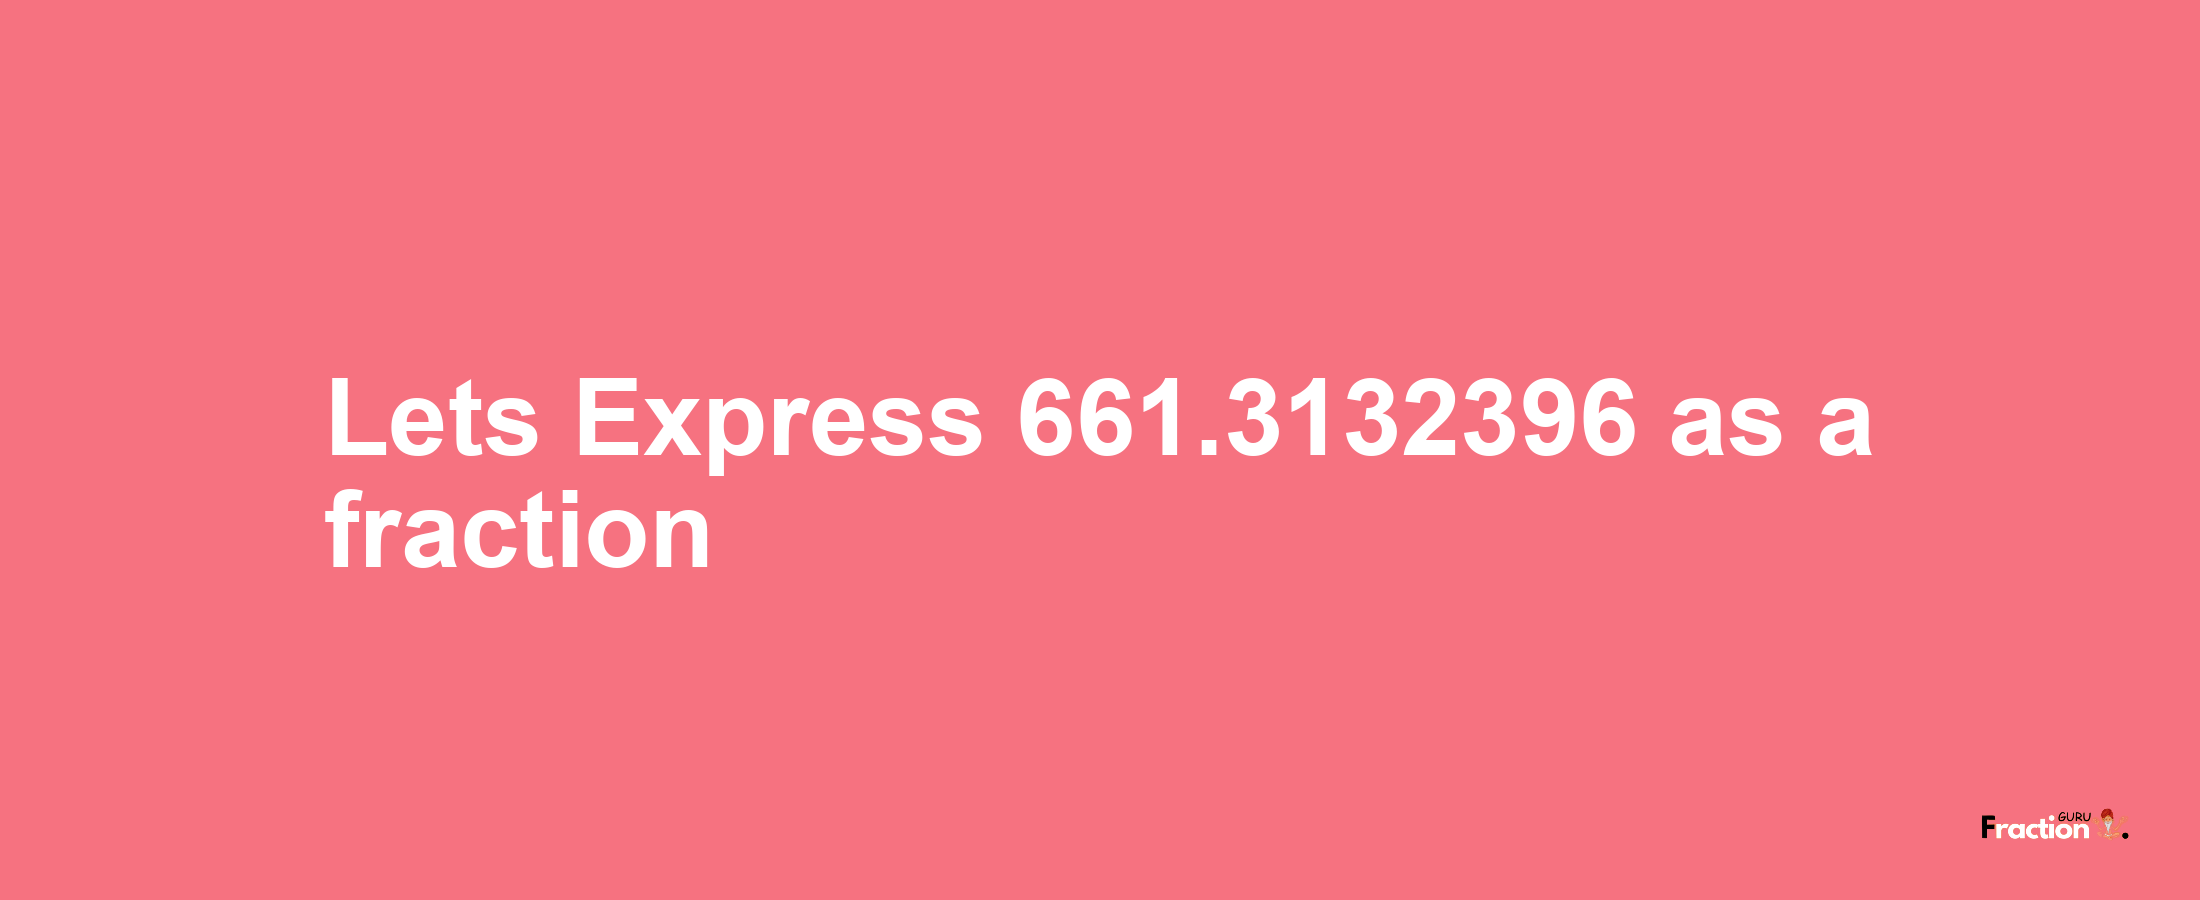 Lets Express 661.3132396 as afraction